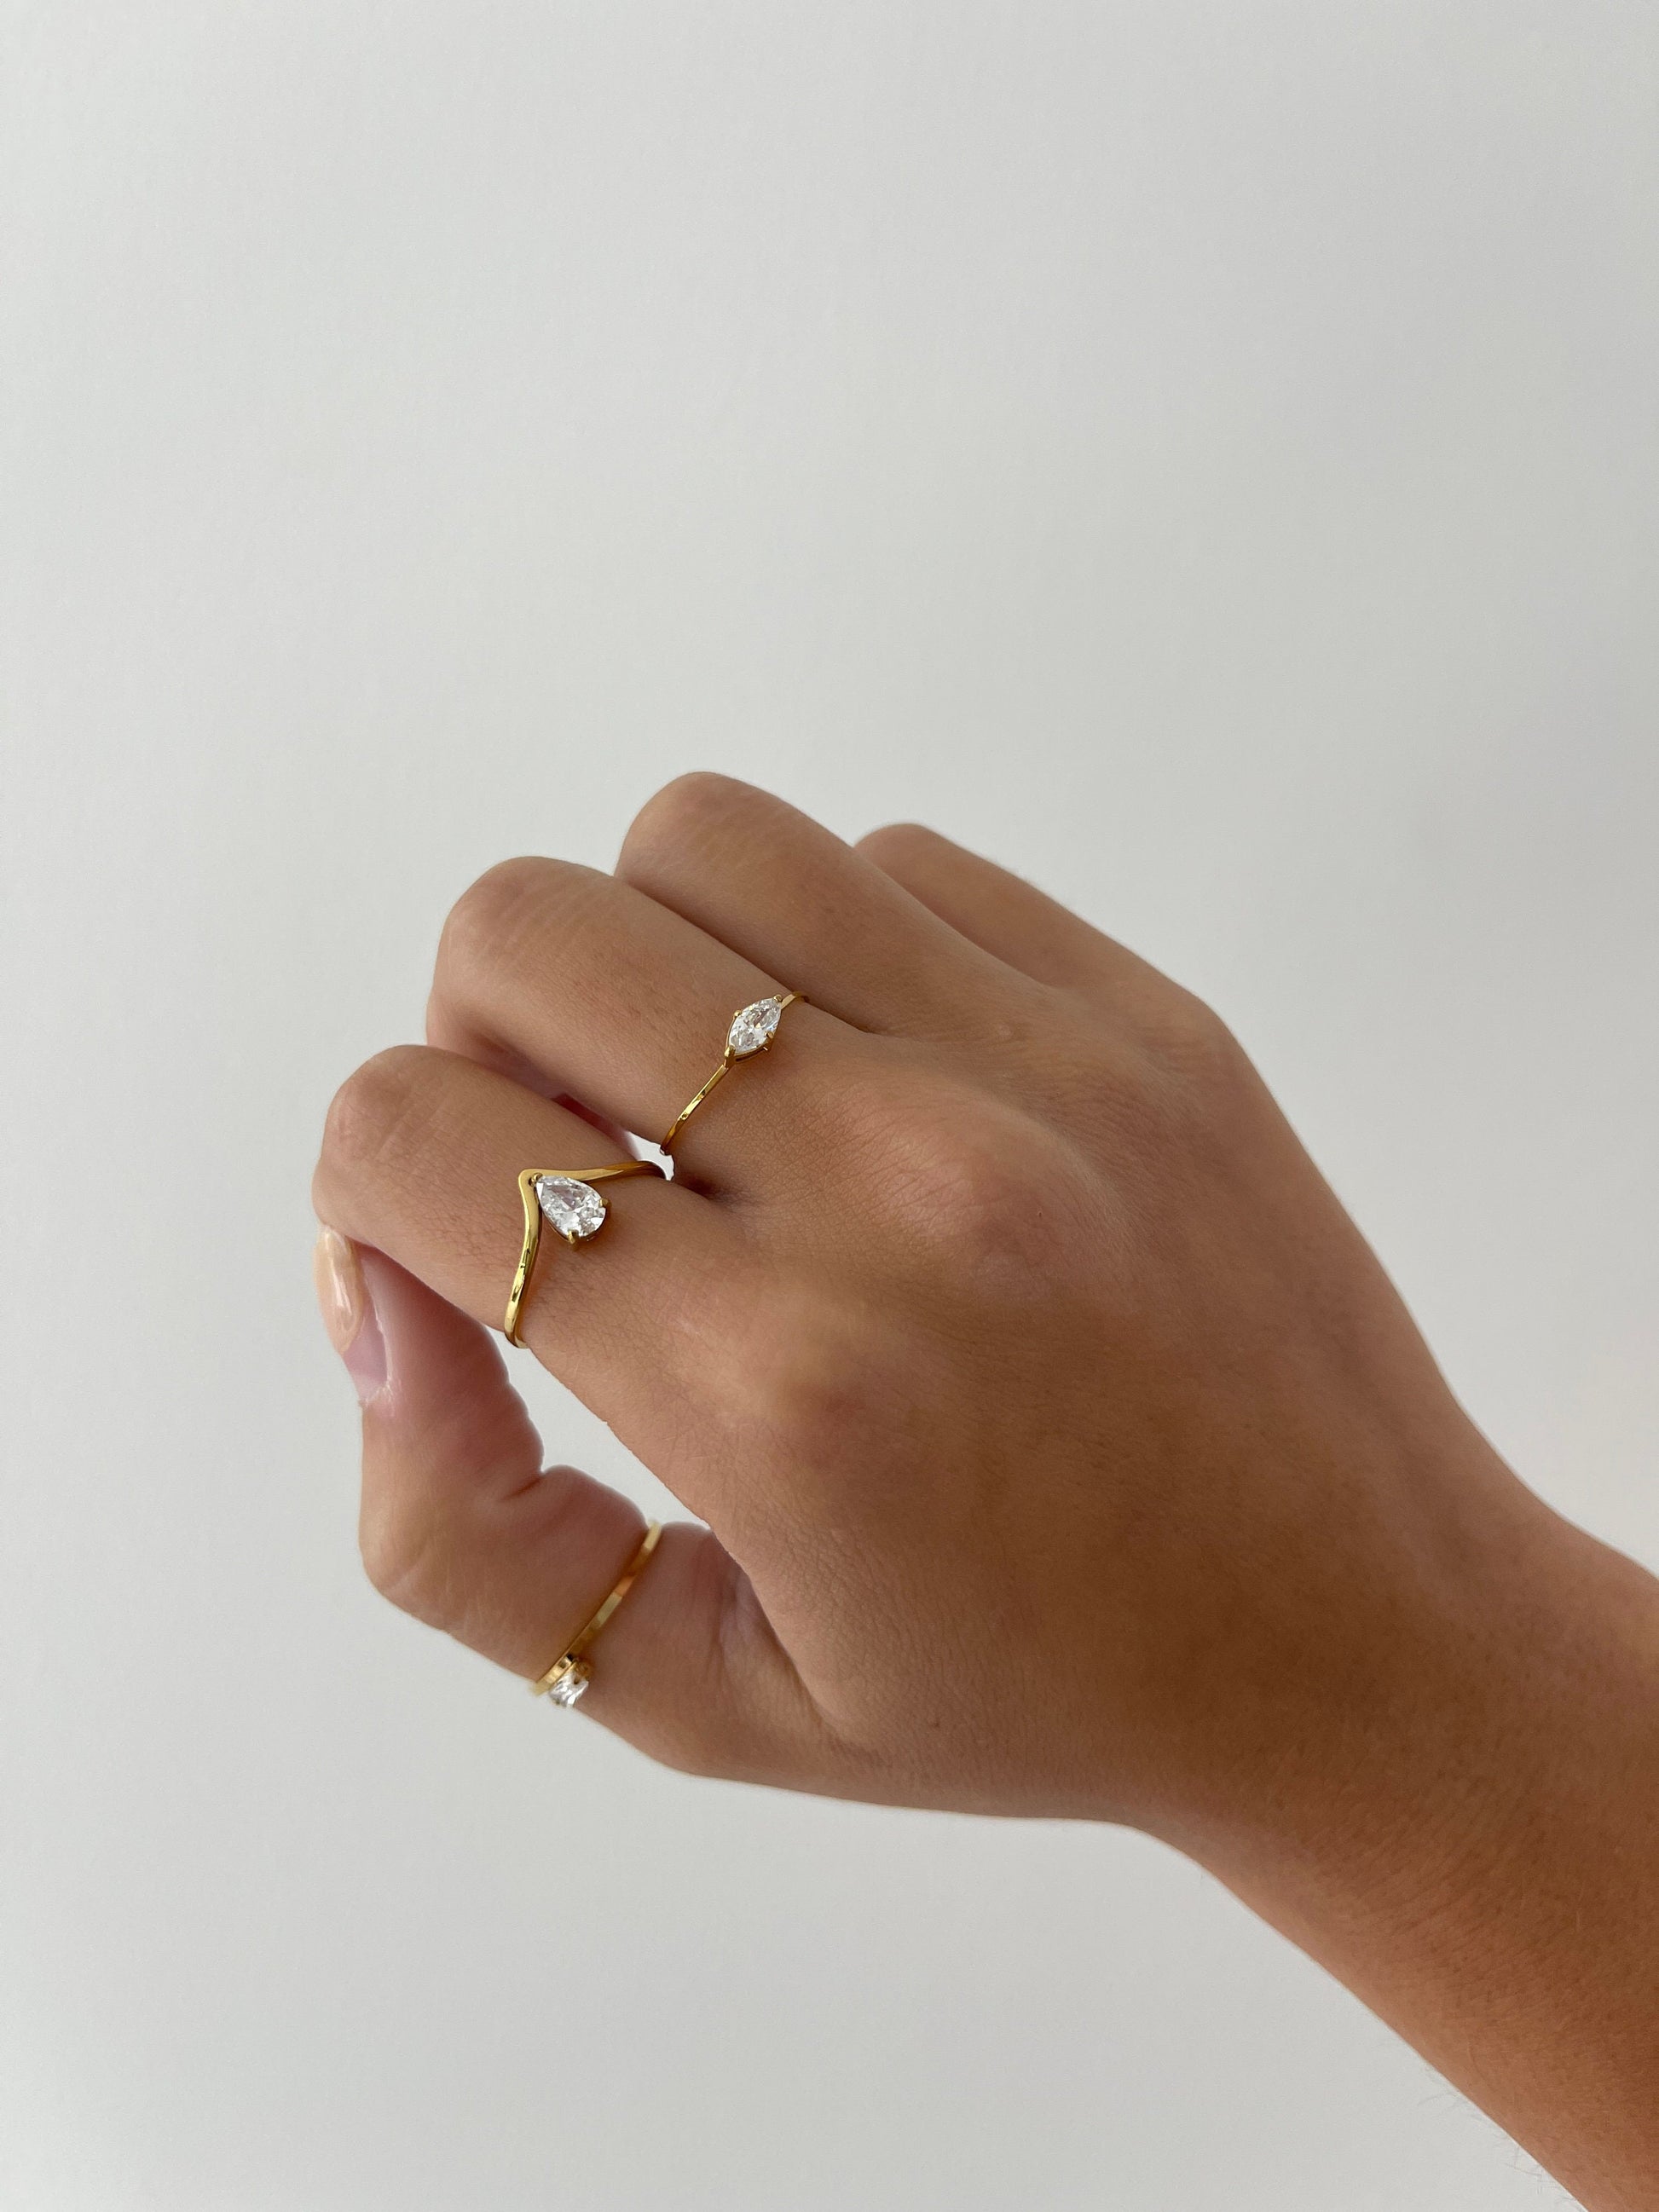 Thin dainty ring, thin gold ring with stone, dainty gold band ring, stackable ring, think gold ring band, thin gold ring band women stone